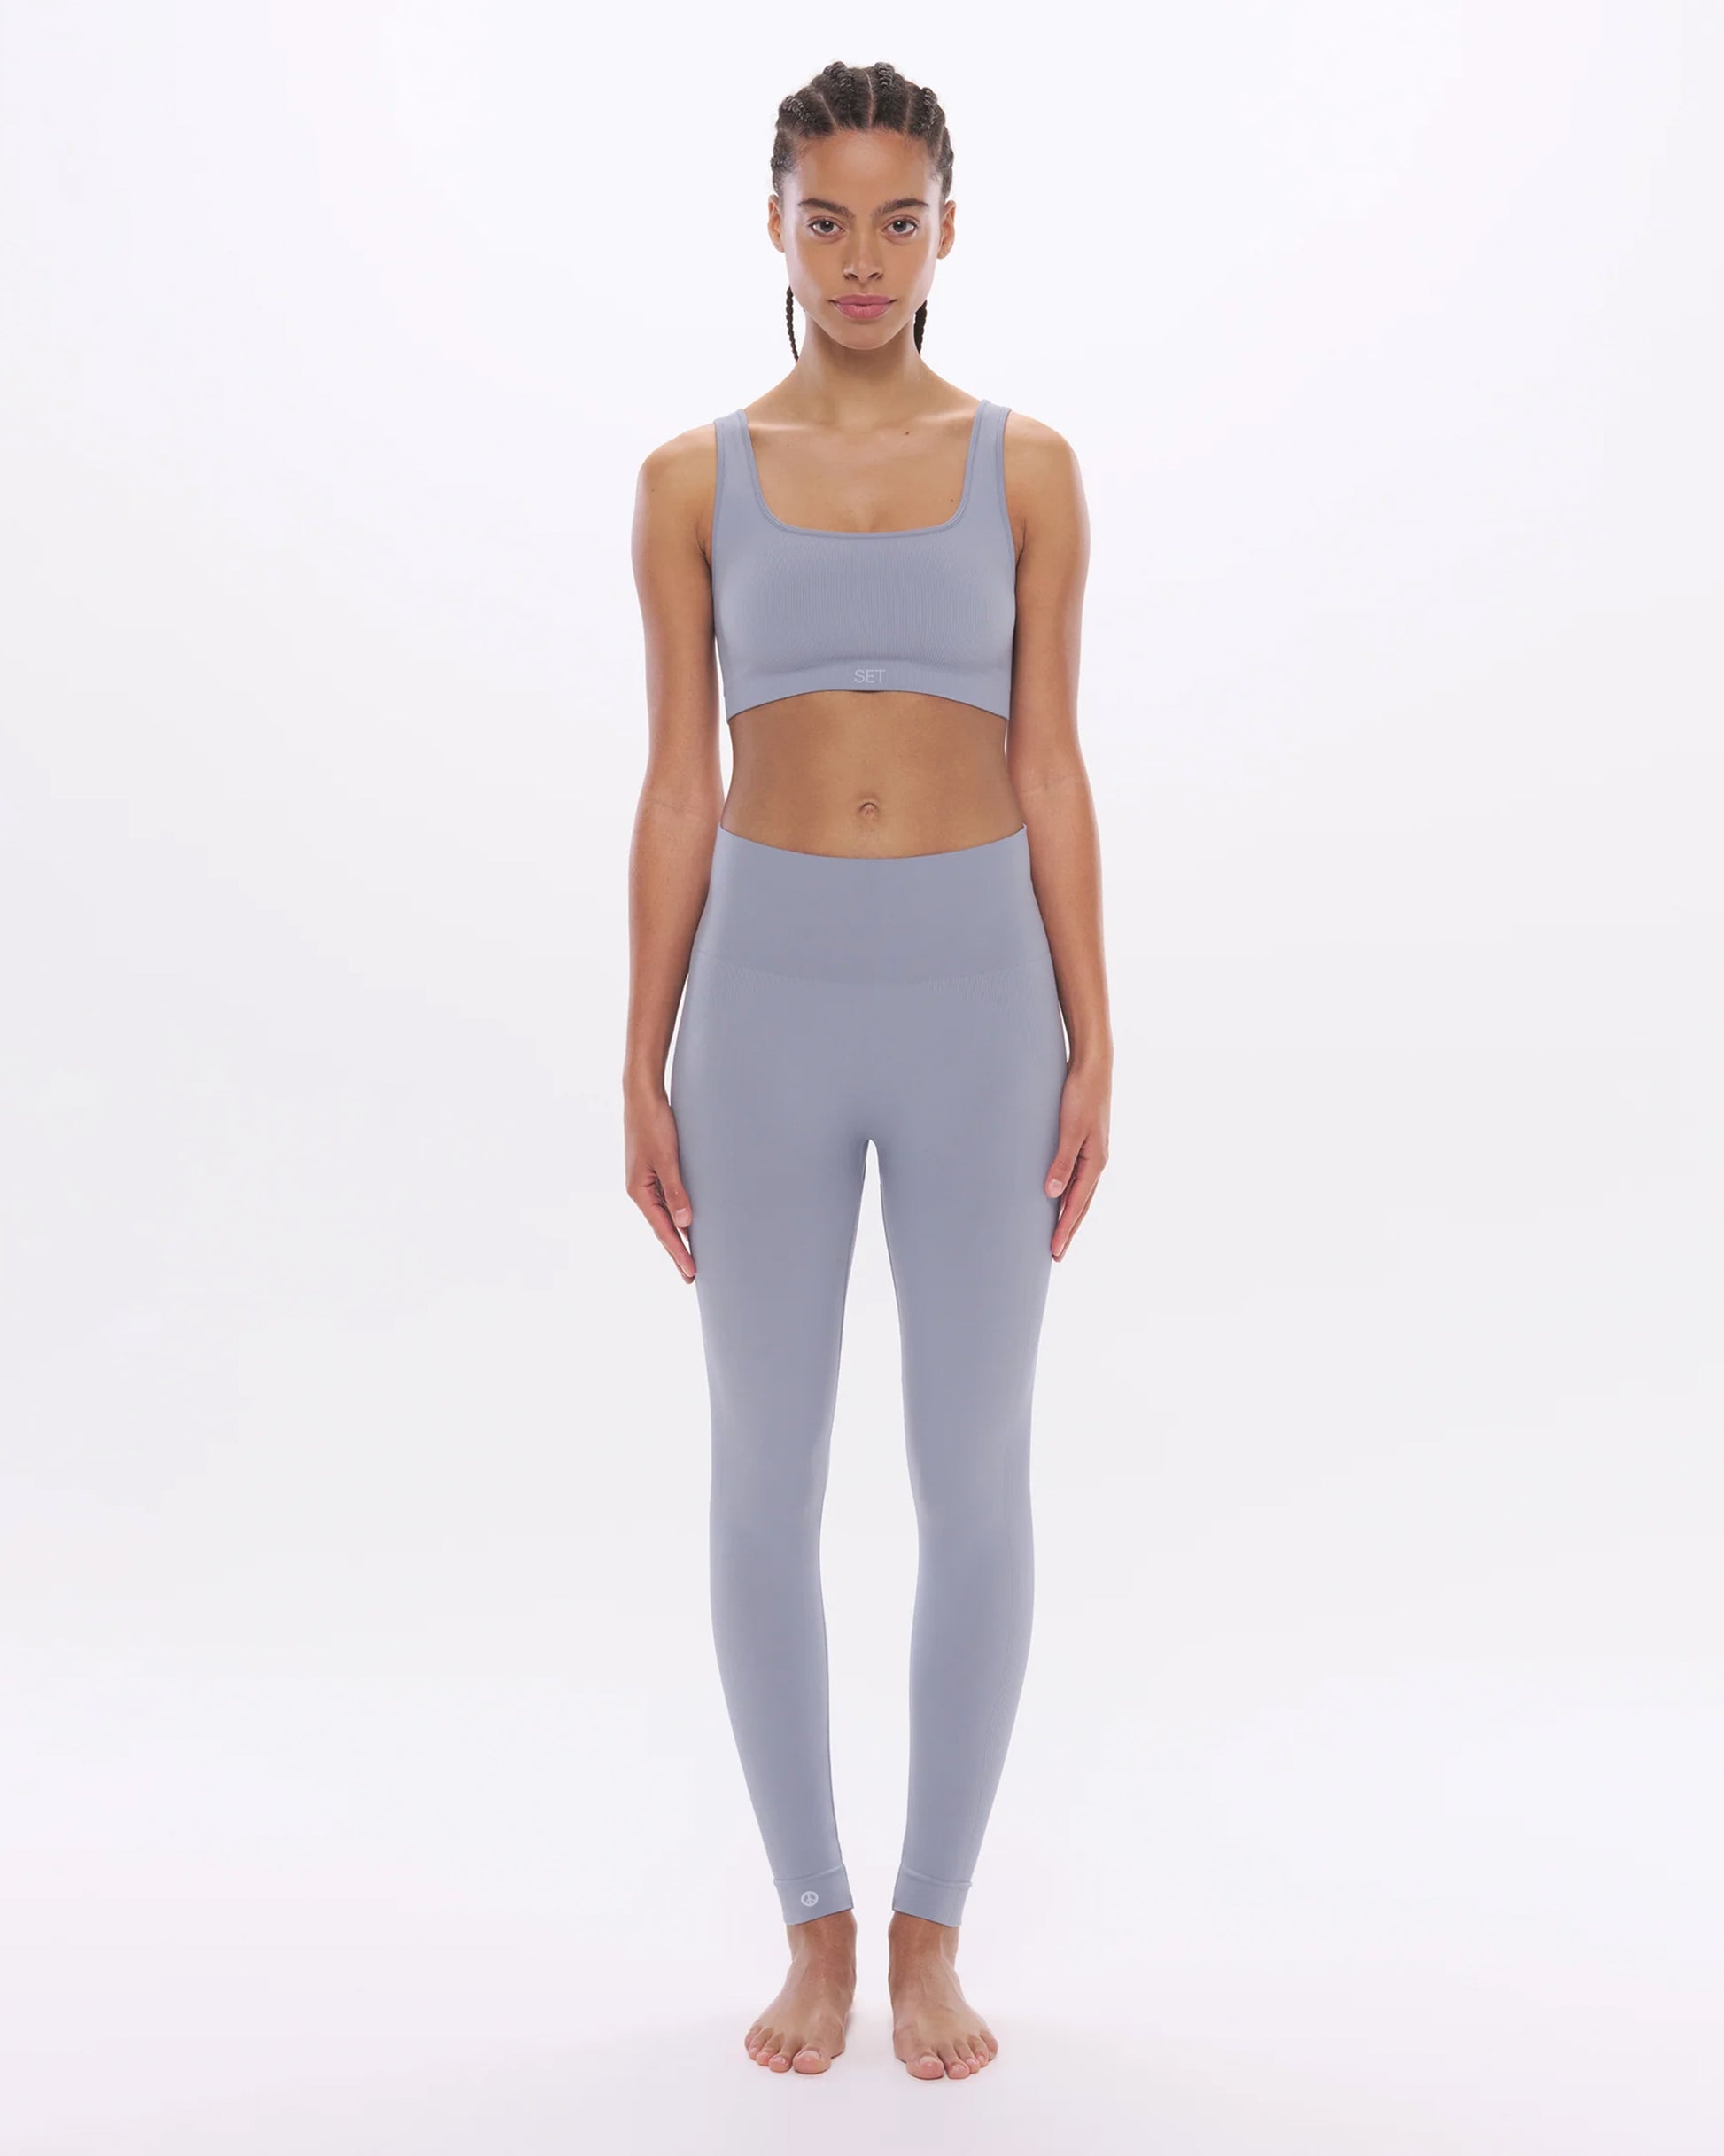 SET Active - Kiwi Ribbed V Bra (Available in XS, S, M) + SCULPTFLEX™  Leggings (Available in All Sizes) Tap + Shop